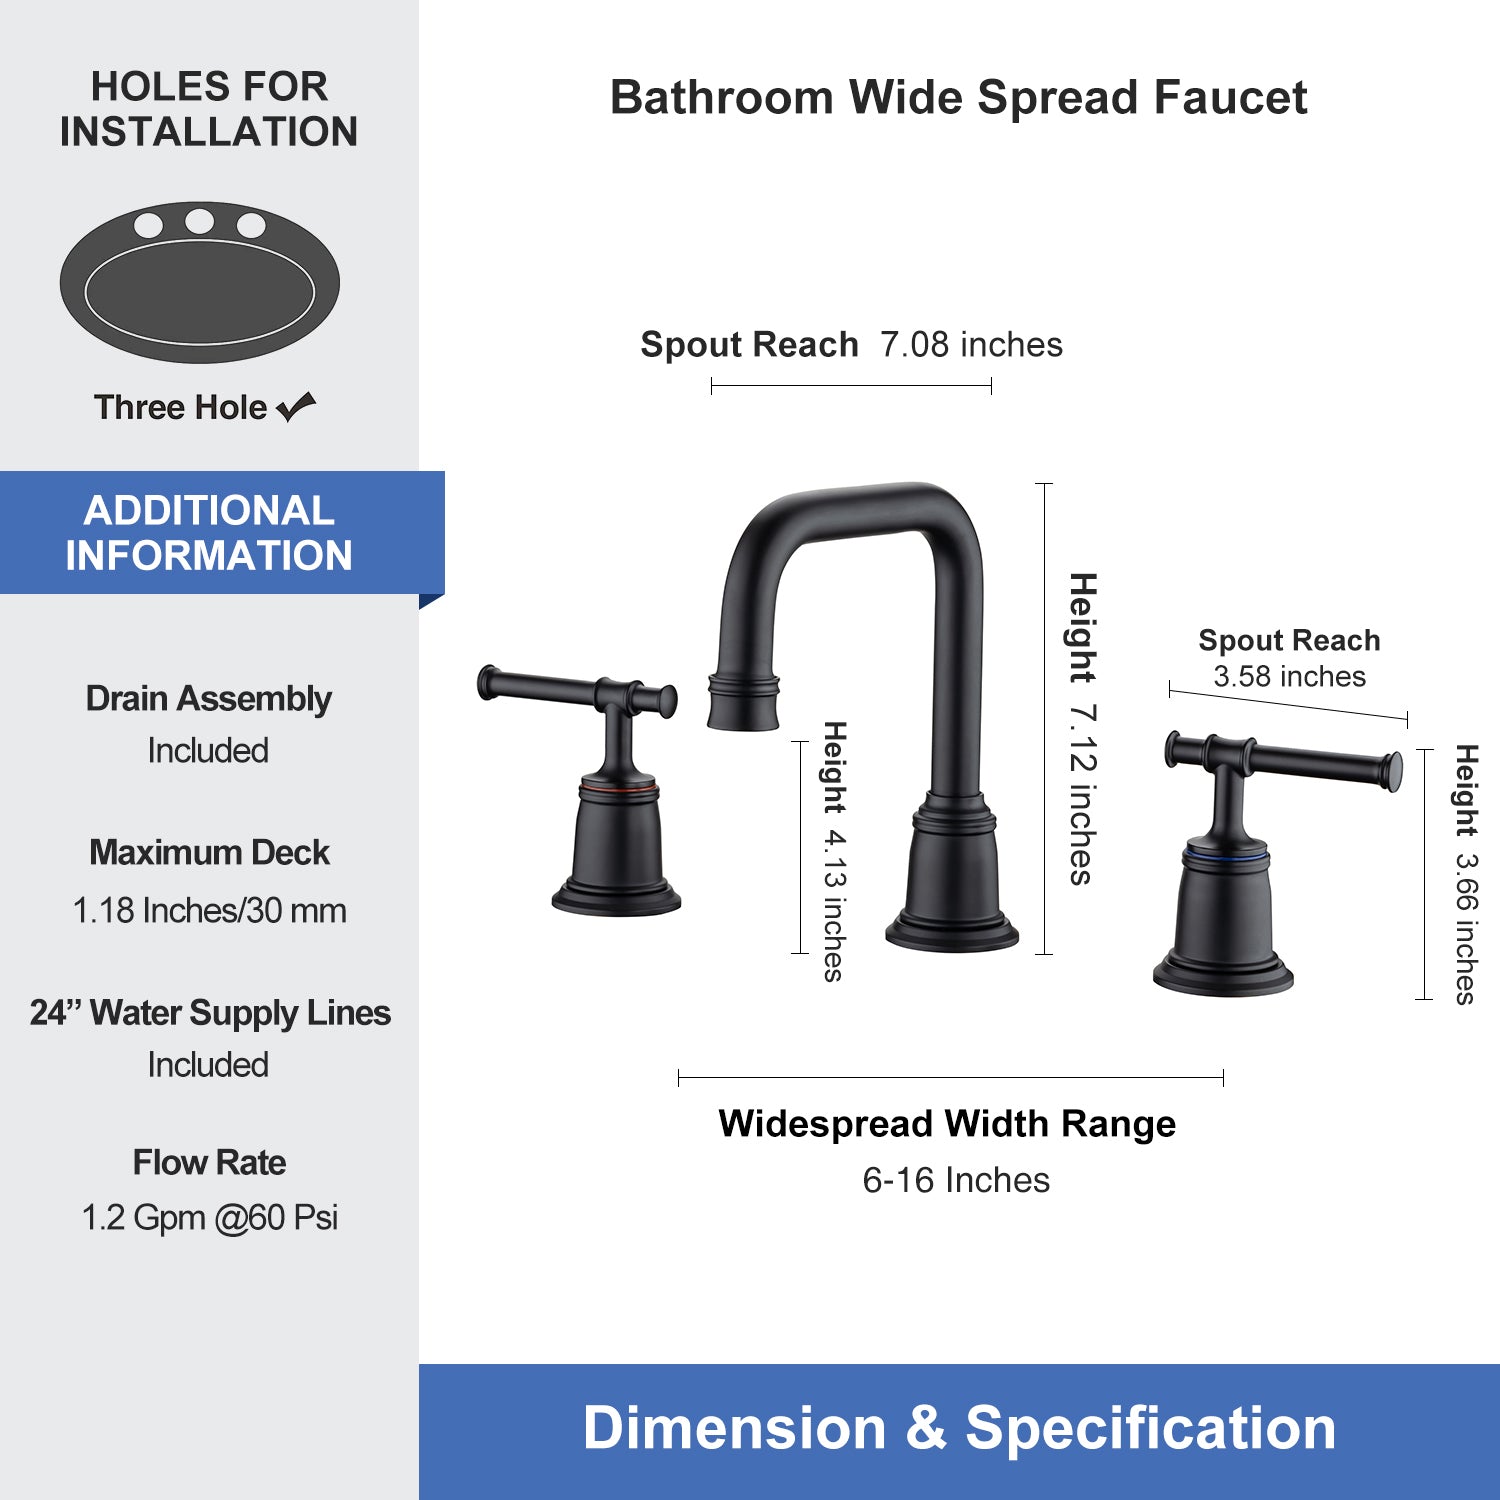 [Rainlex RX83008]Widespread Faucet 2-handle Bathroom Faucet with Drain Assembly